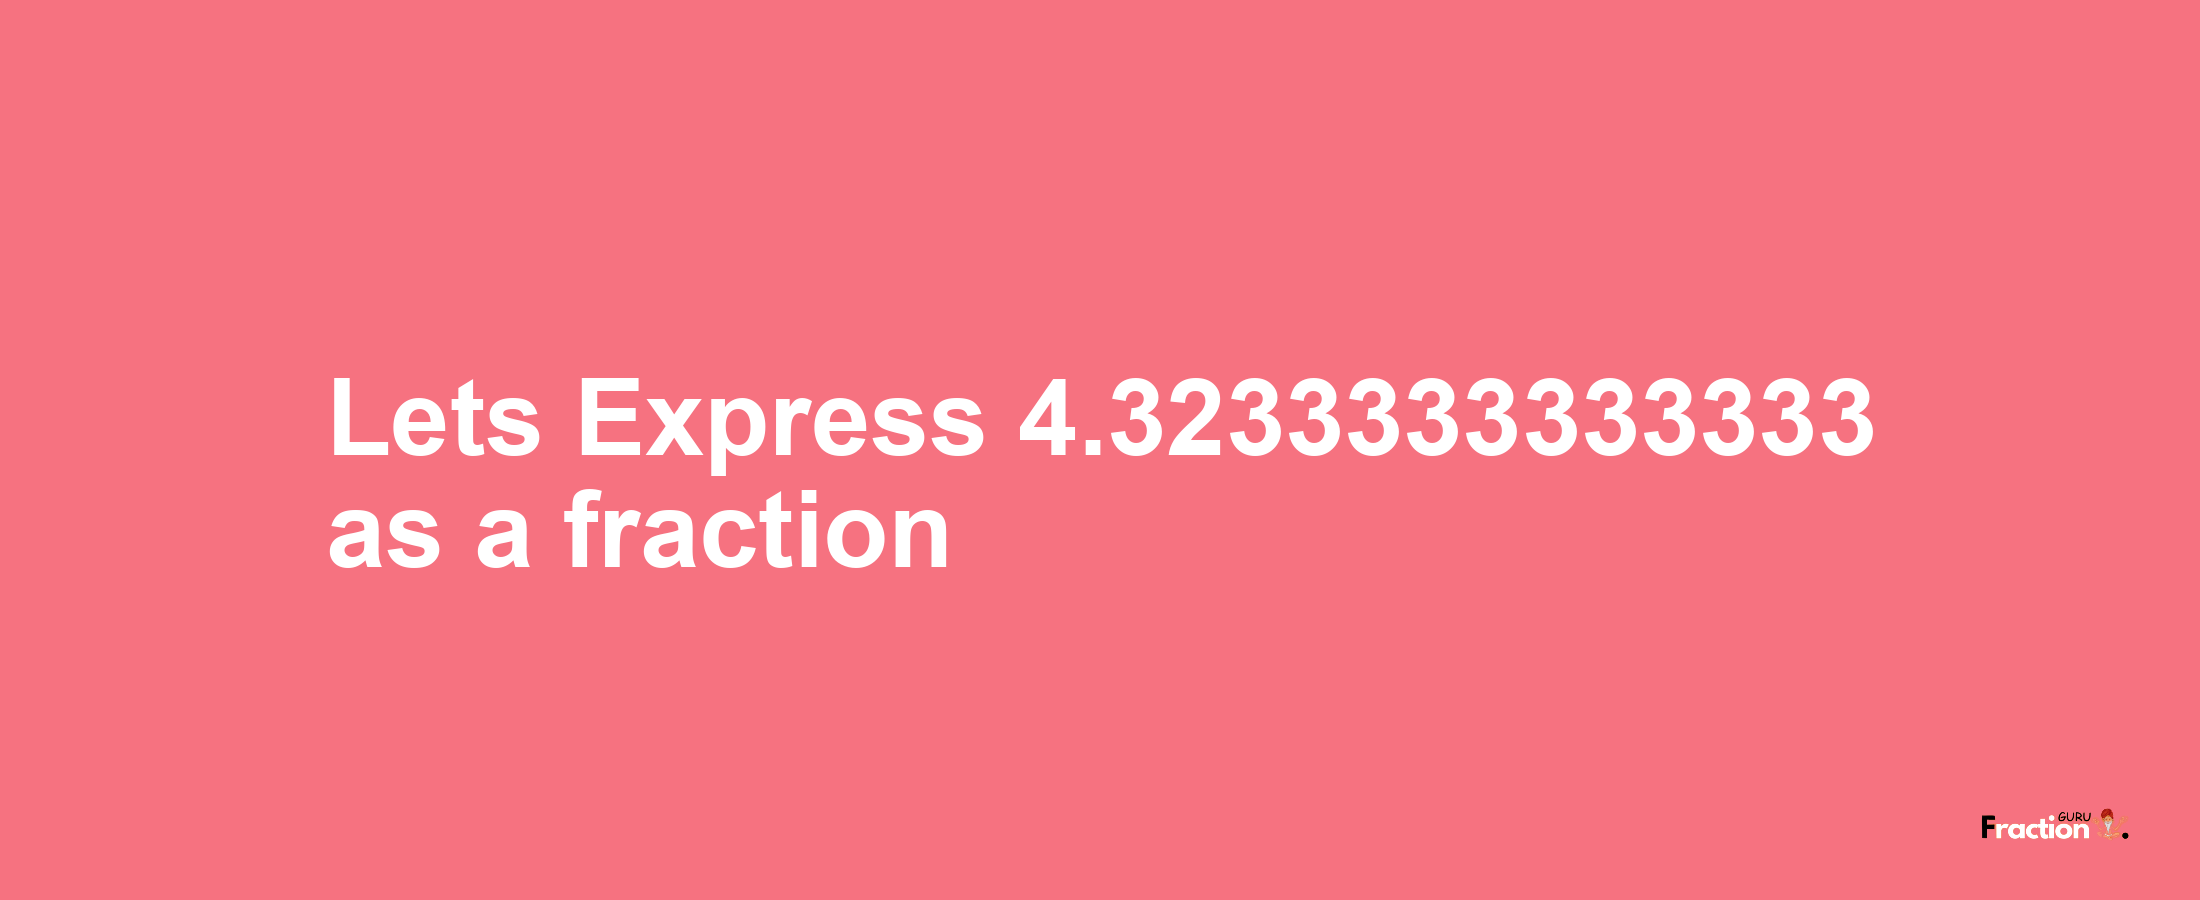 Lets Express 4.3233333333333 as afraction